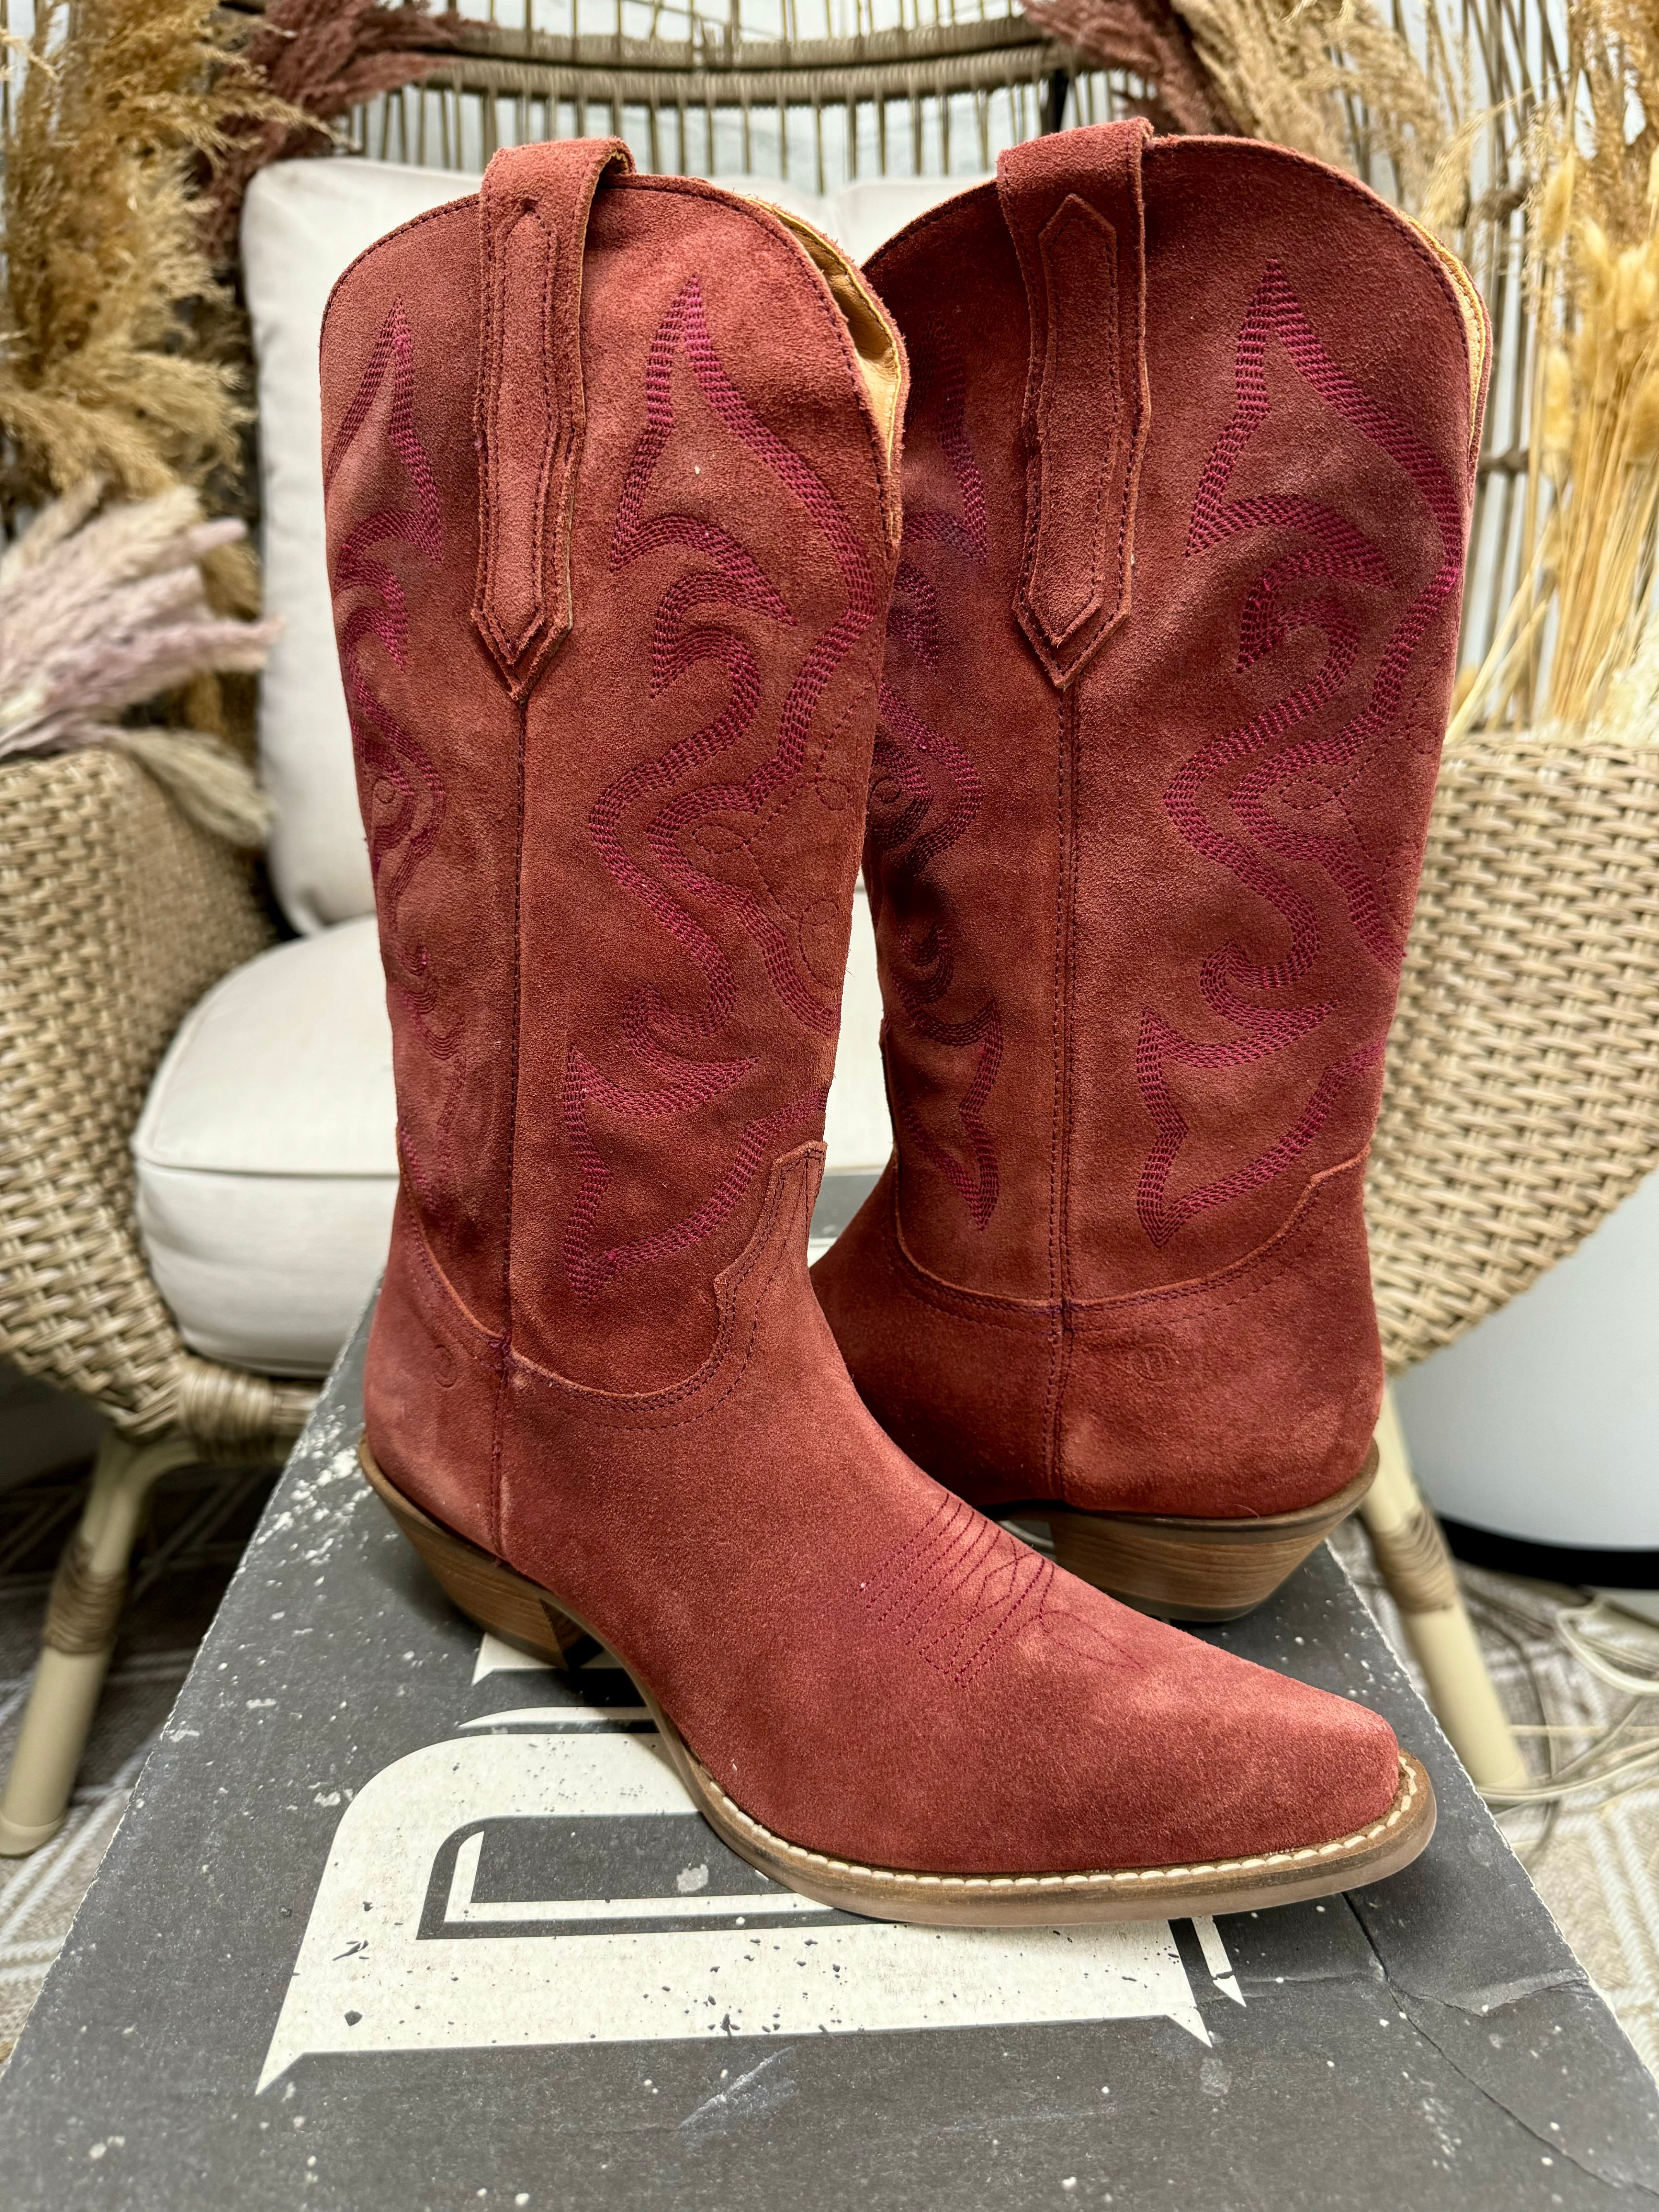 Model Boots Size 9 | Dingo | Out West Suede Cowboy Boots in Cranberry Red FINAL SALE - Giddy Up Glamour Boutique